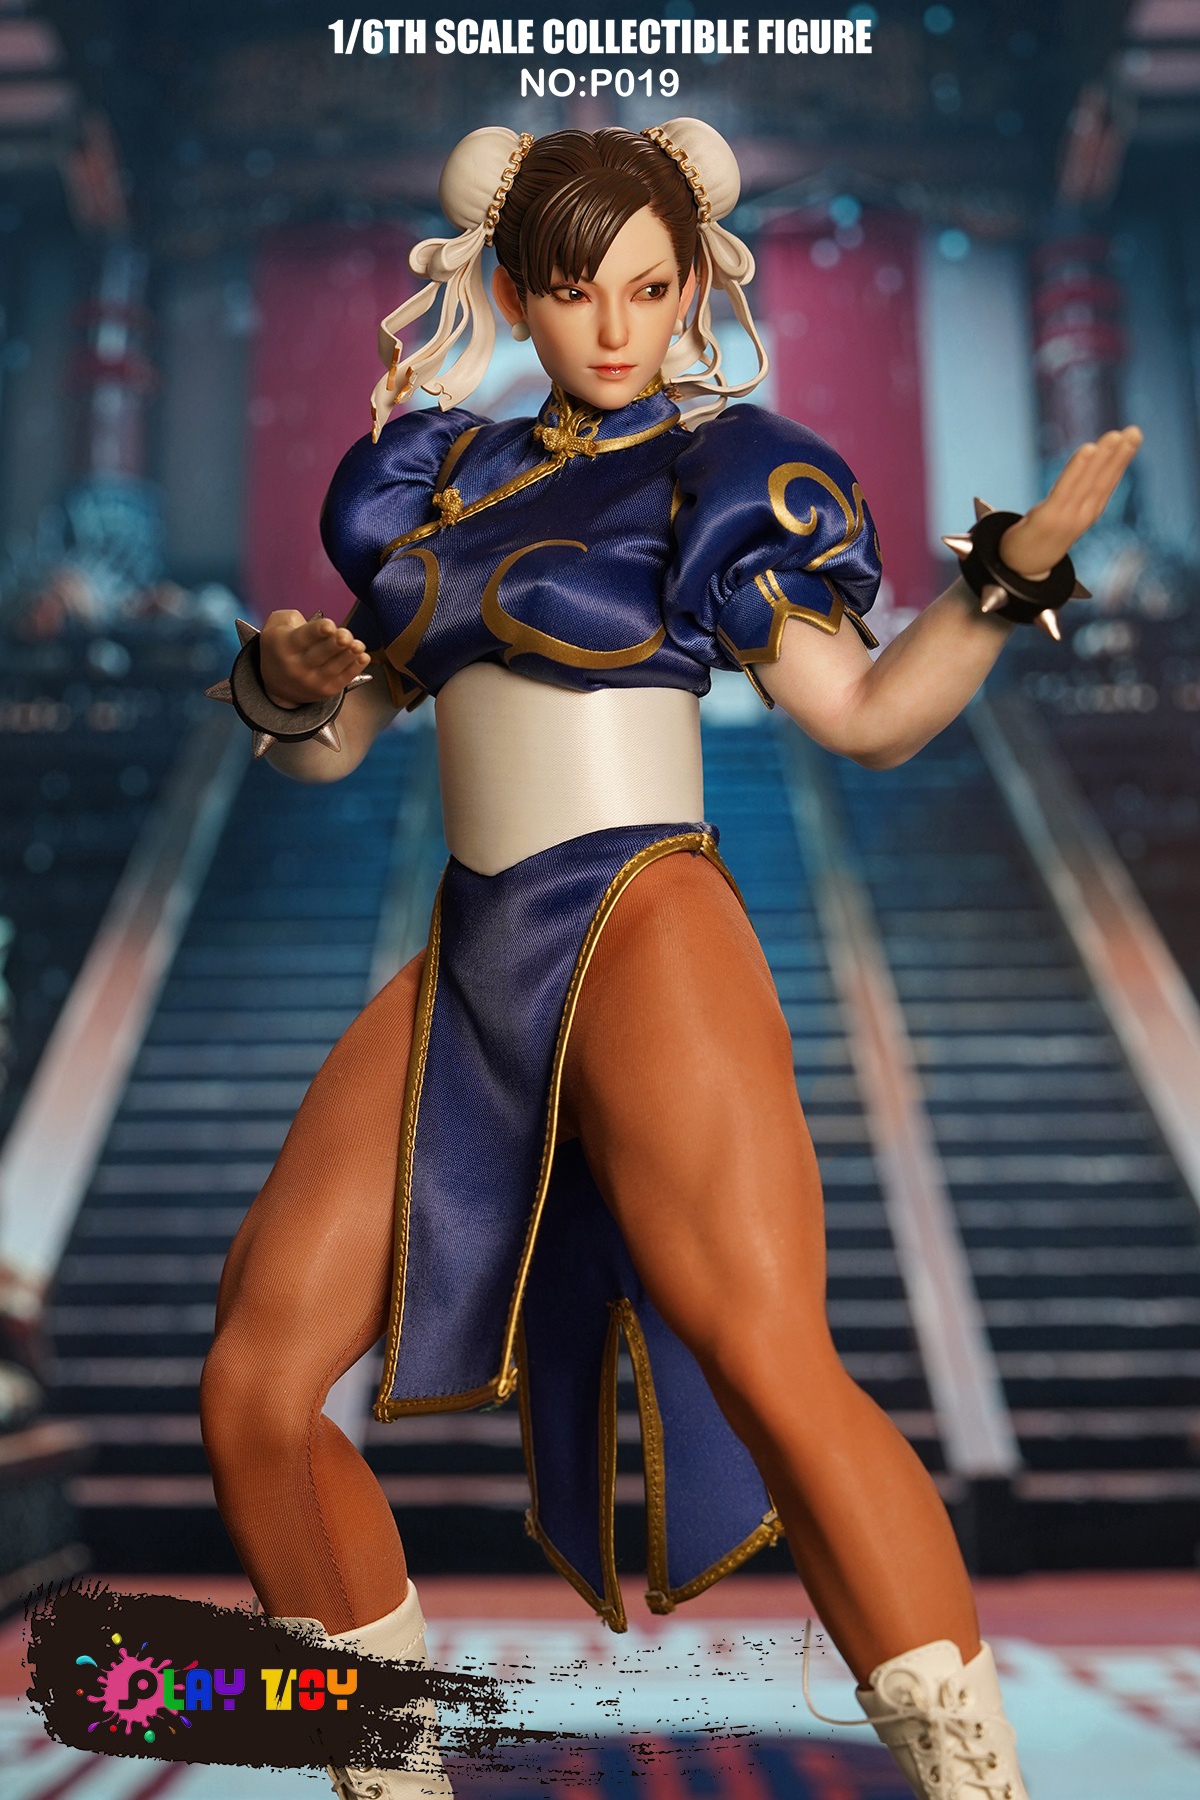 ChunLi - NEW PRODUCT: PLAY TOY - 1/6 Goddess of Fighting (NO:P019) 0211